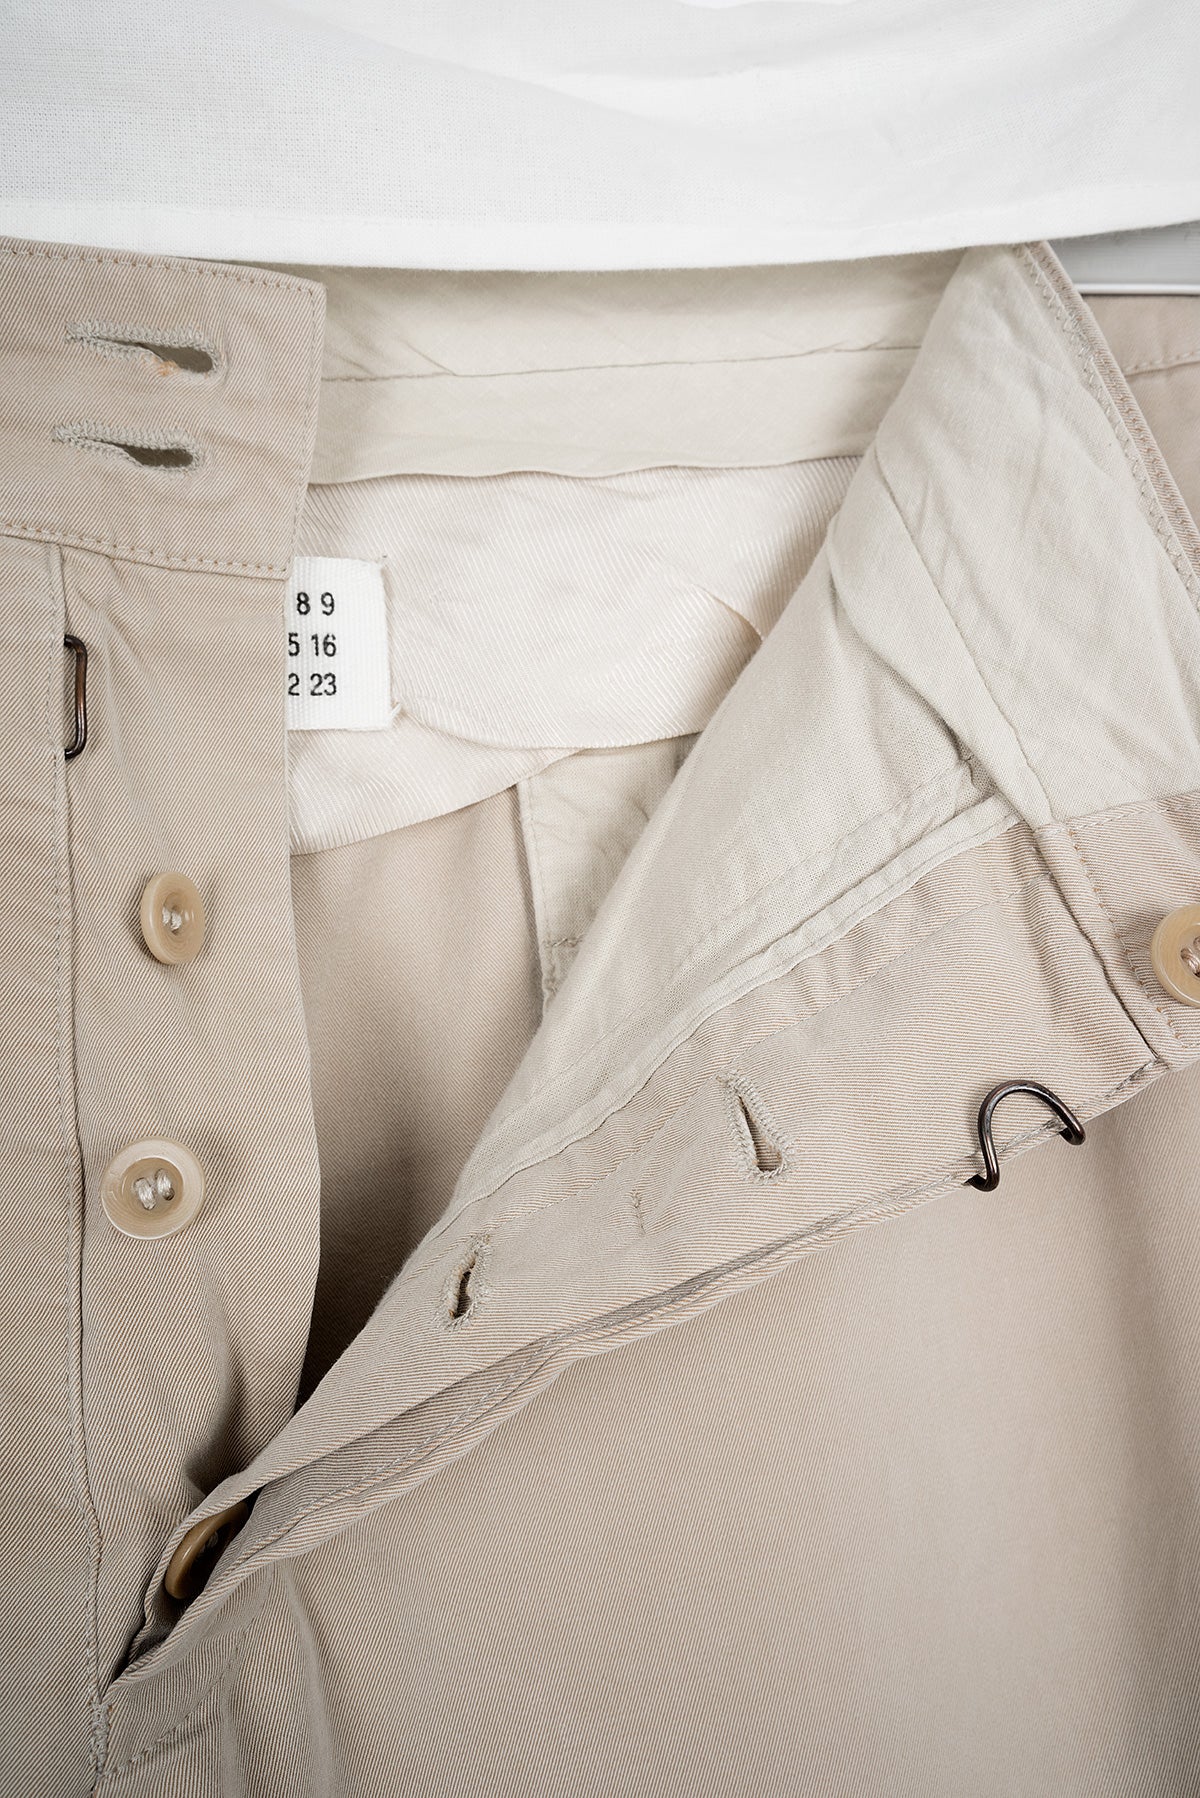 2002 S/S ANATOMIC PANTS IN SAND TWILL COTTON